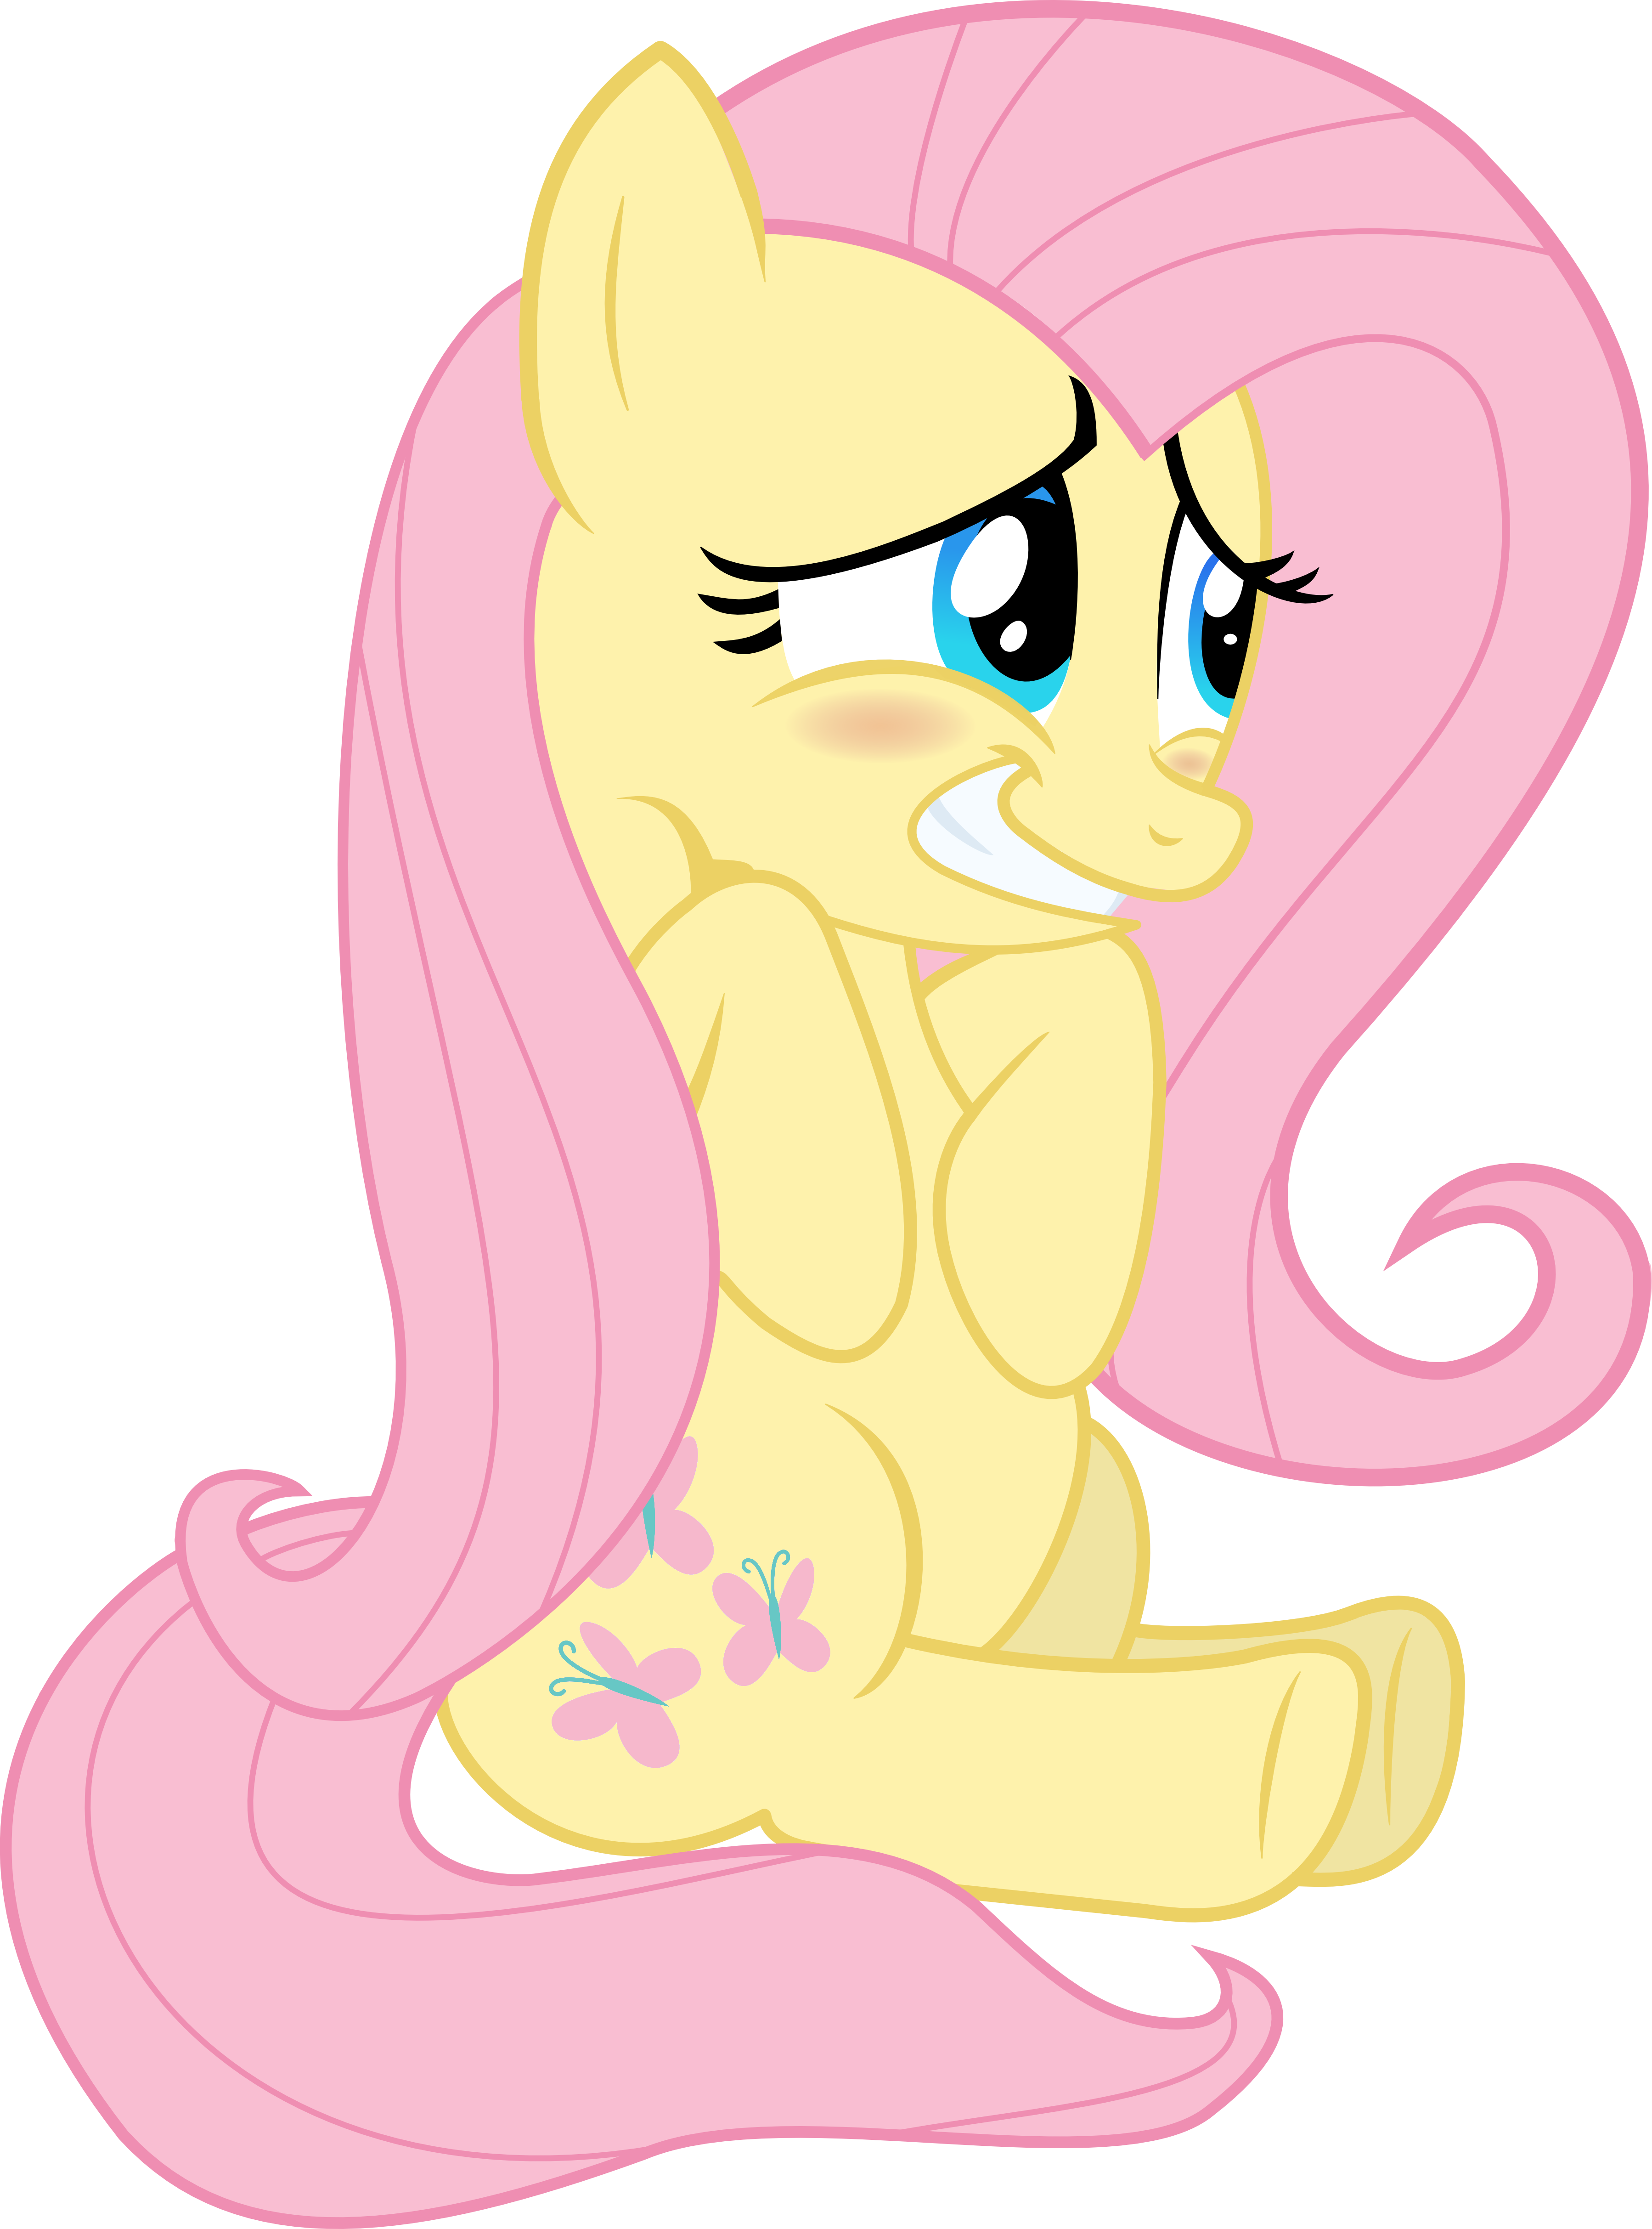 blushing_fluttershy___vector_by_regolith